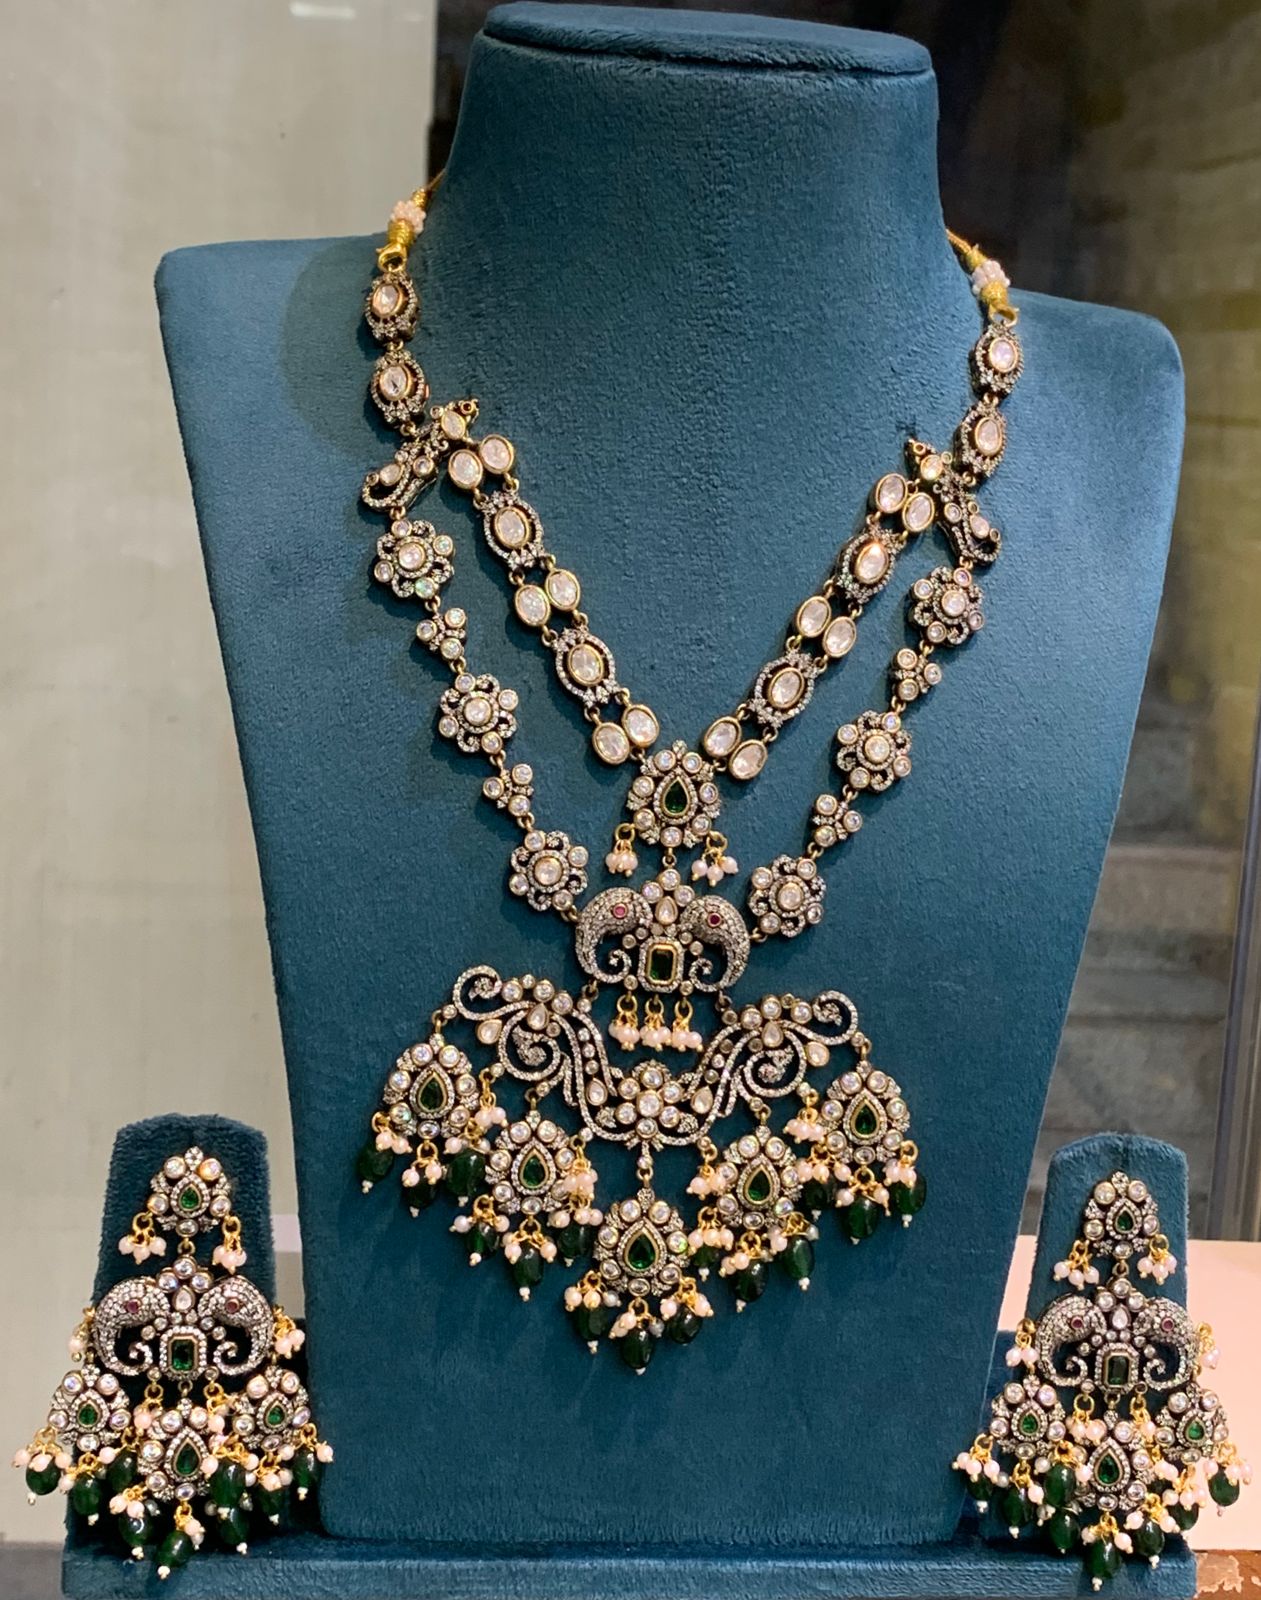 Unique Victorian polish Cz Stone Necklace with Earrings